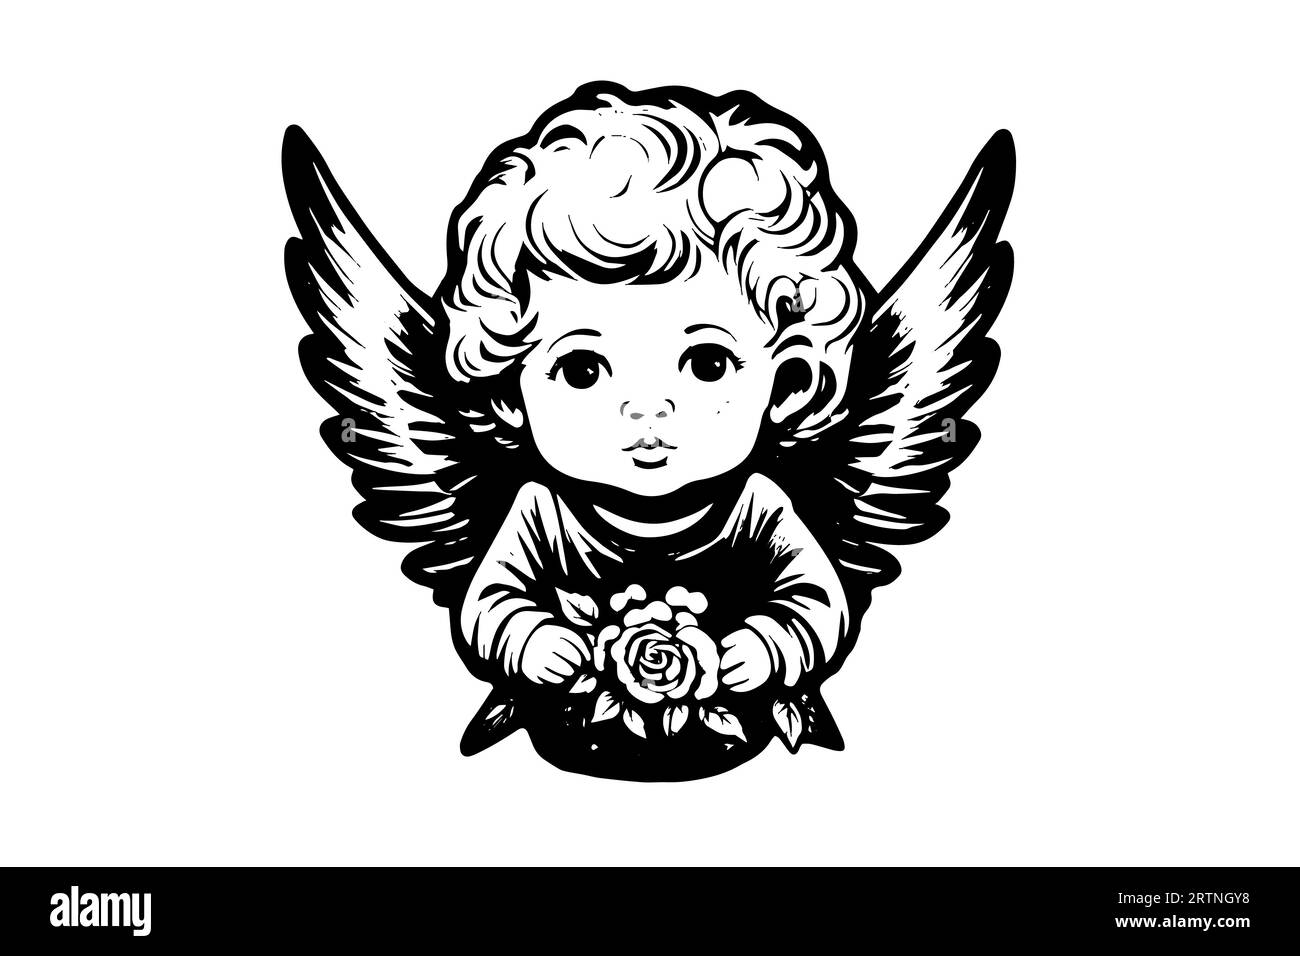 Little angel logotype vector retro style engraving black and white illustration. Cute baby with wings. Stock Vector